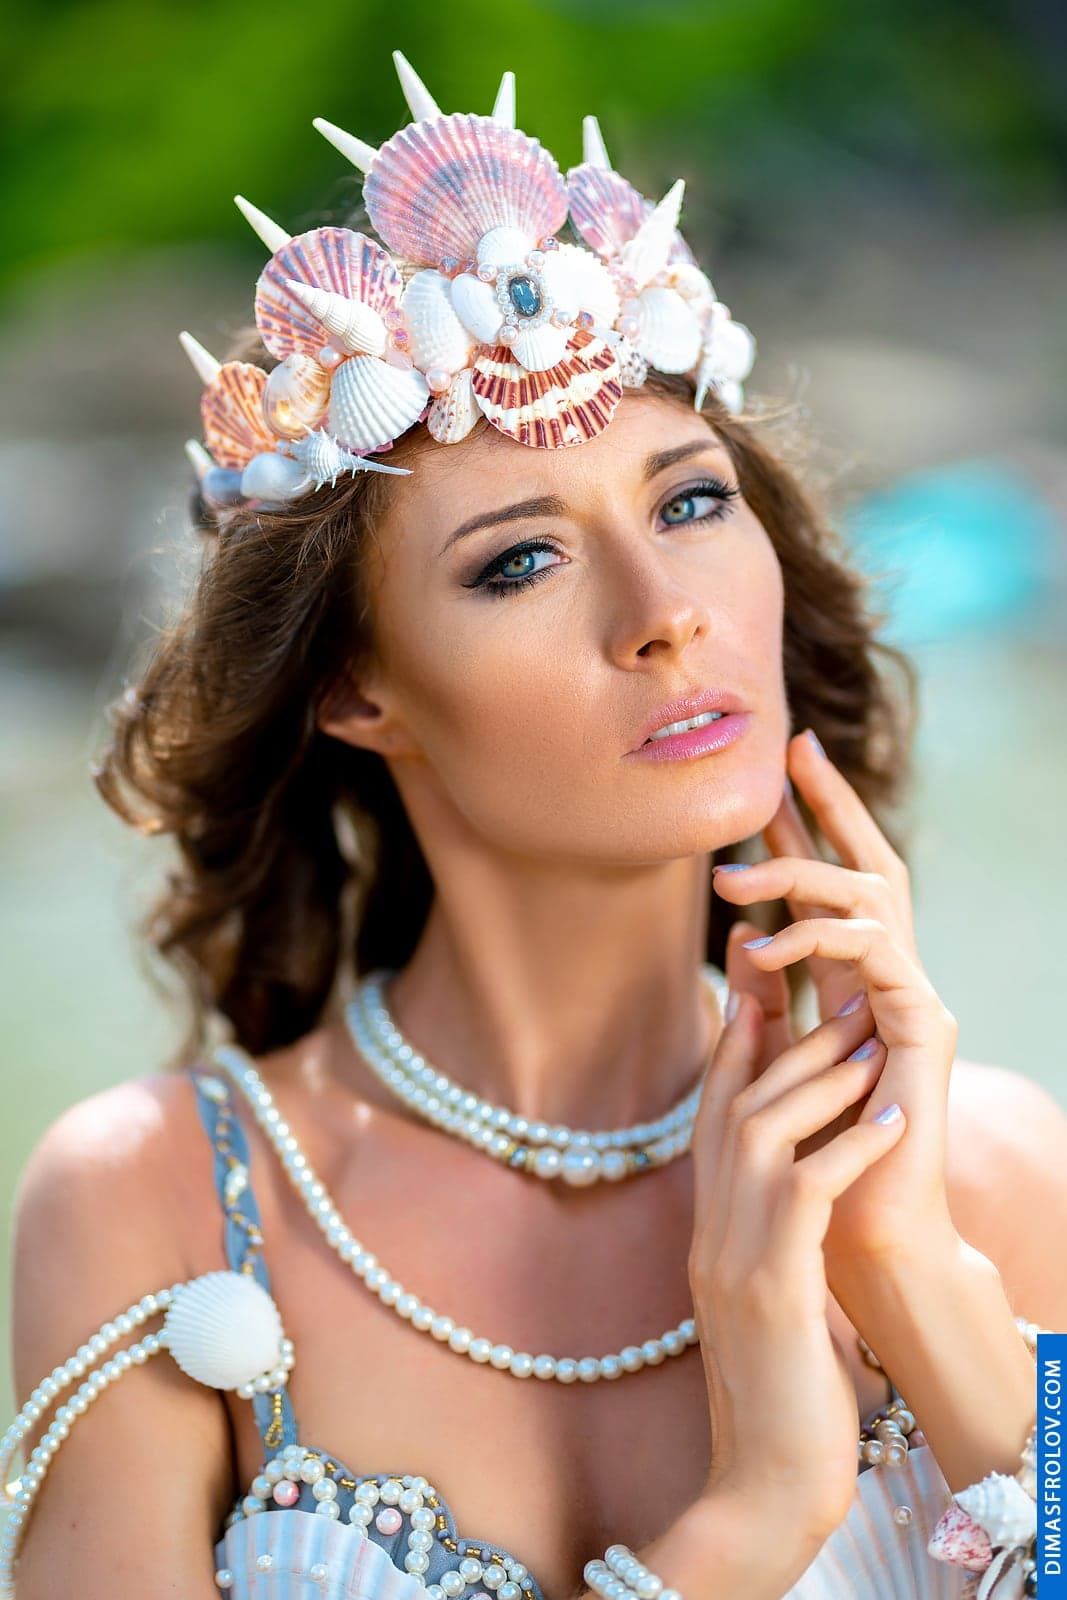 Unique shell accessories for a themed photo shoot on Koh Samui. photographer Dimas Frolov. photo1607